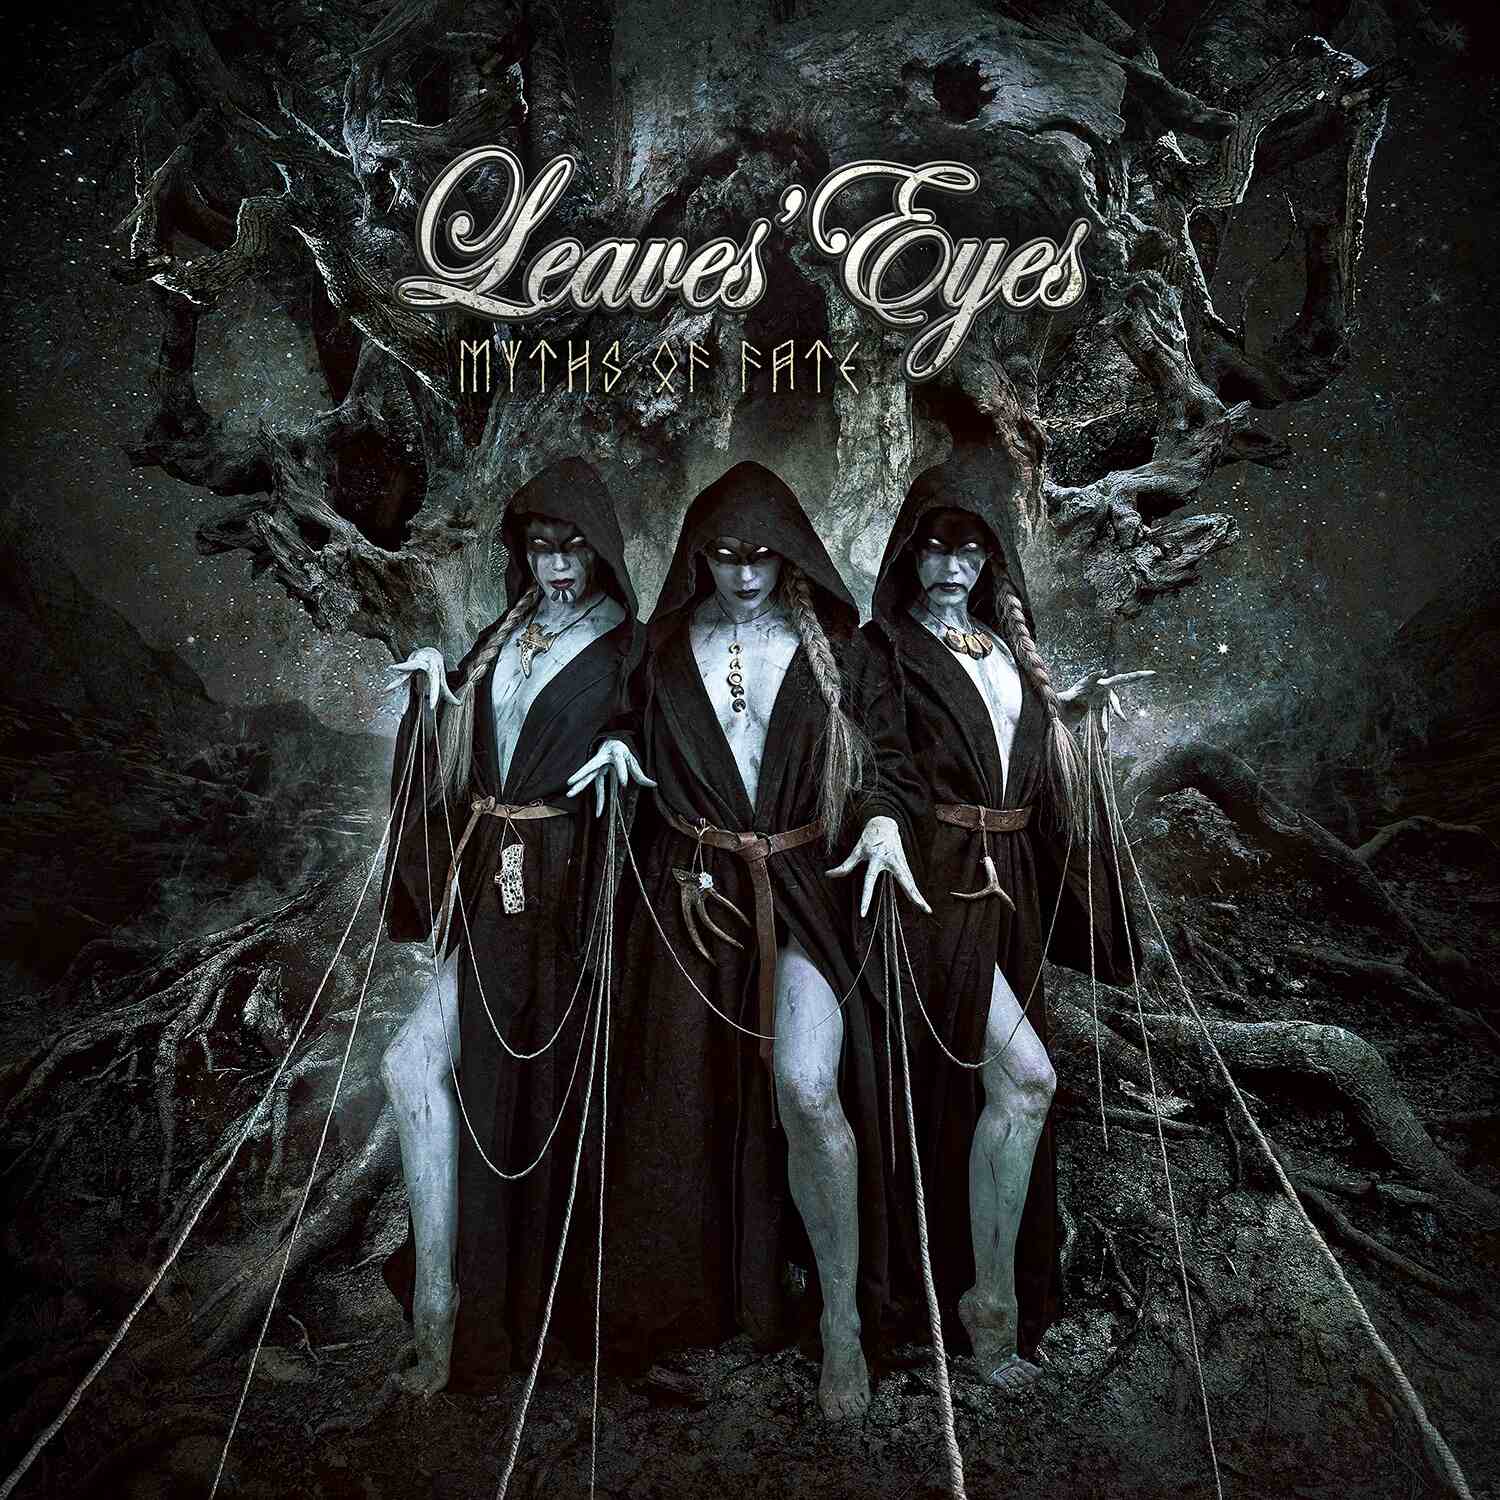 leaves eyes myths of fate